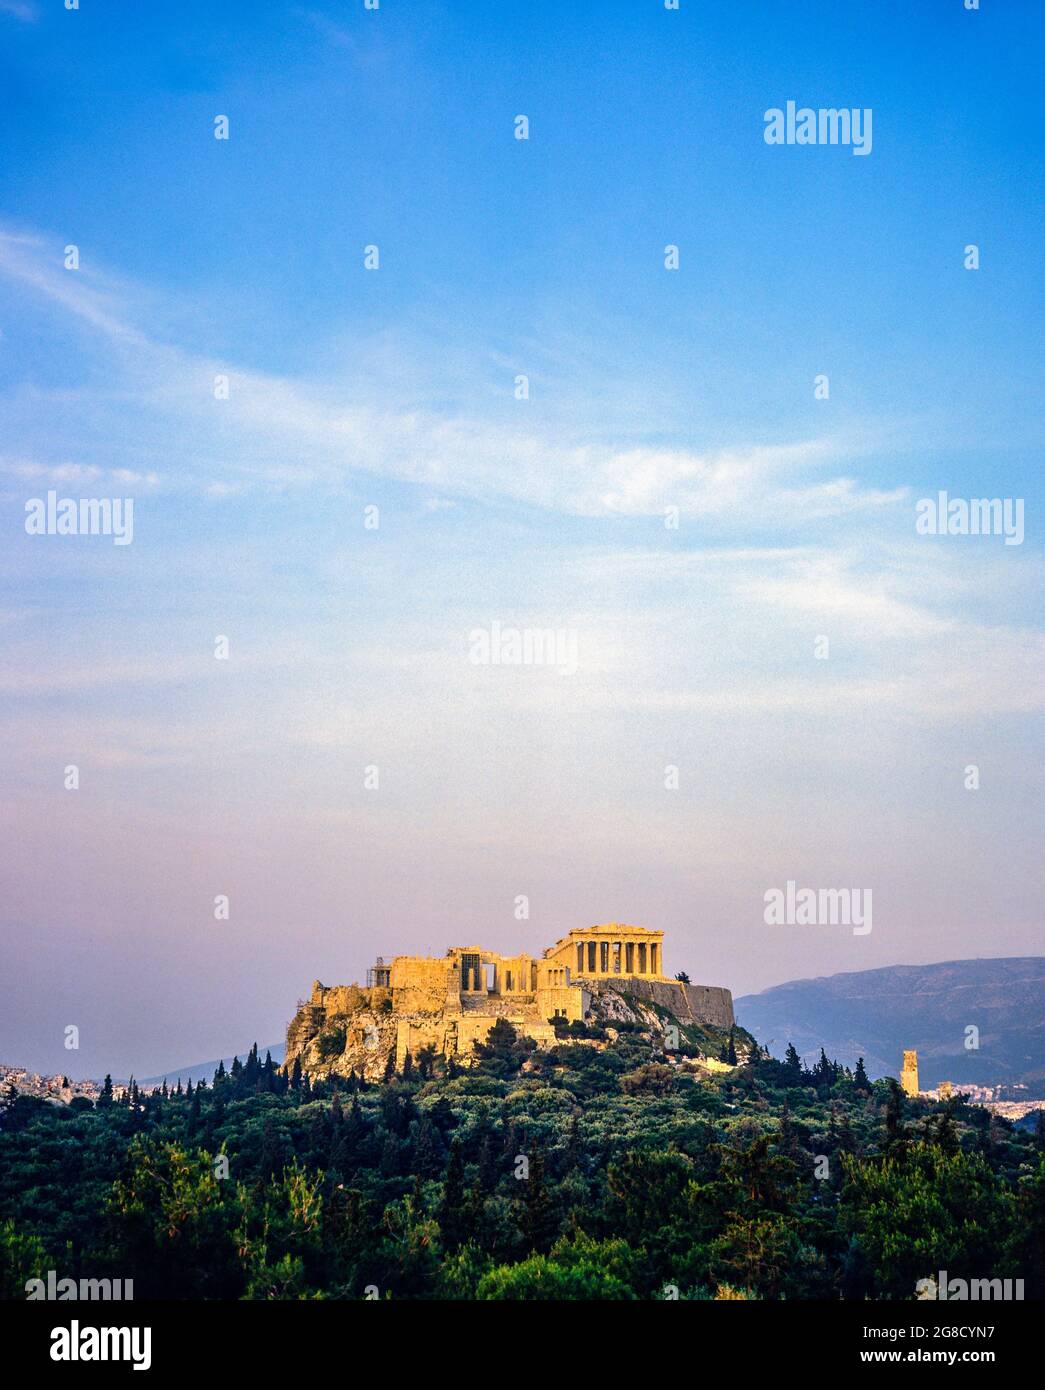 Athens, Parthenon temple atop the Acropolis hill at sunset, archaeological site, Greece, Europe, Stock Photo